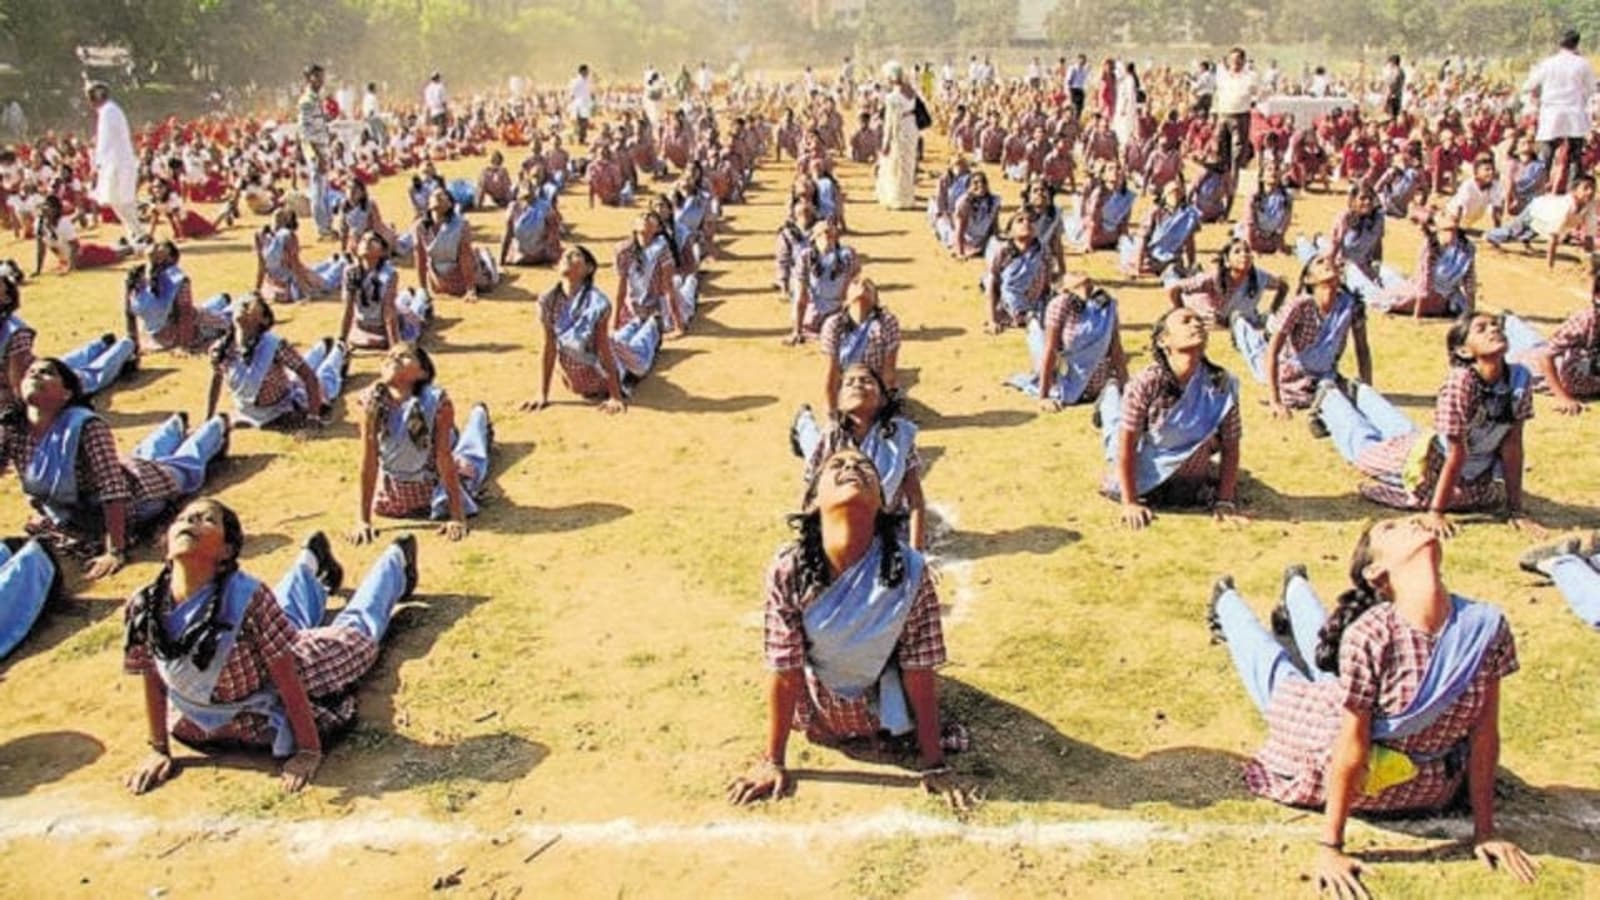 10 mn expected to participate in first-ever global Surya Namaskar ...